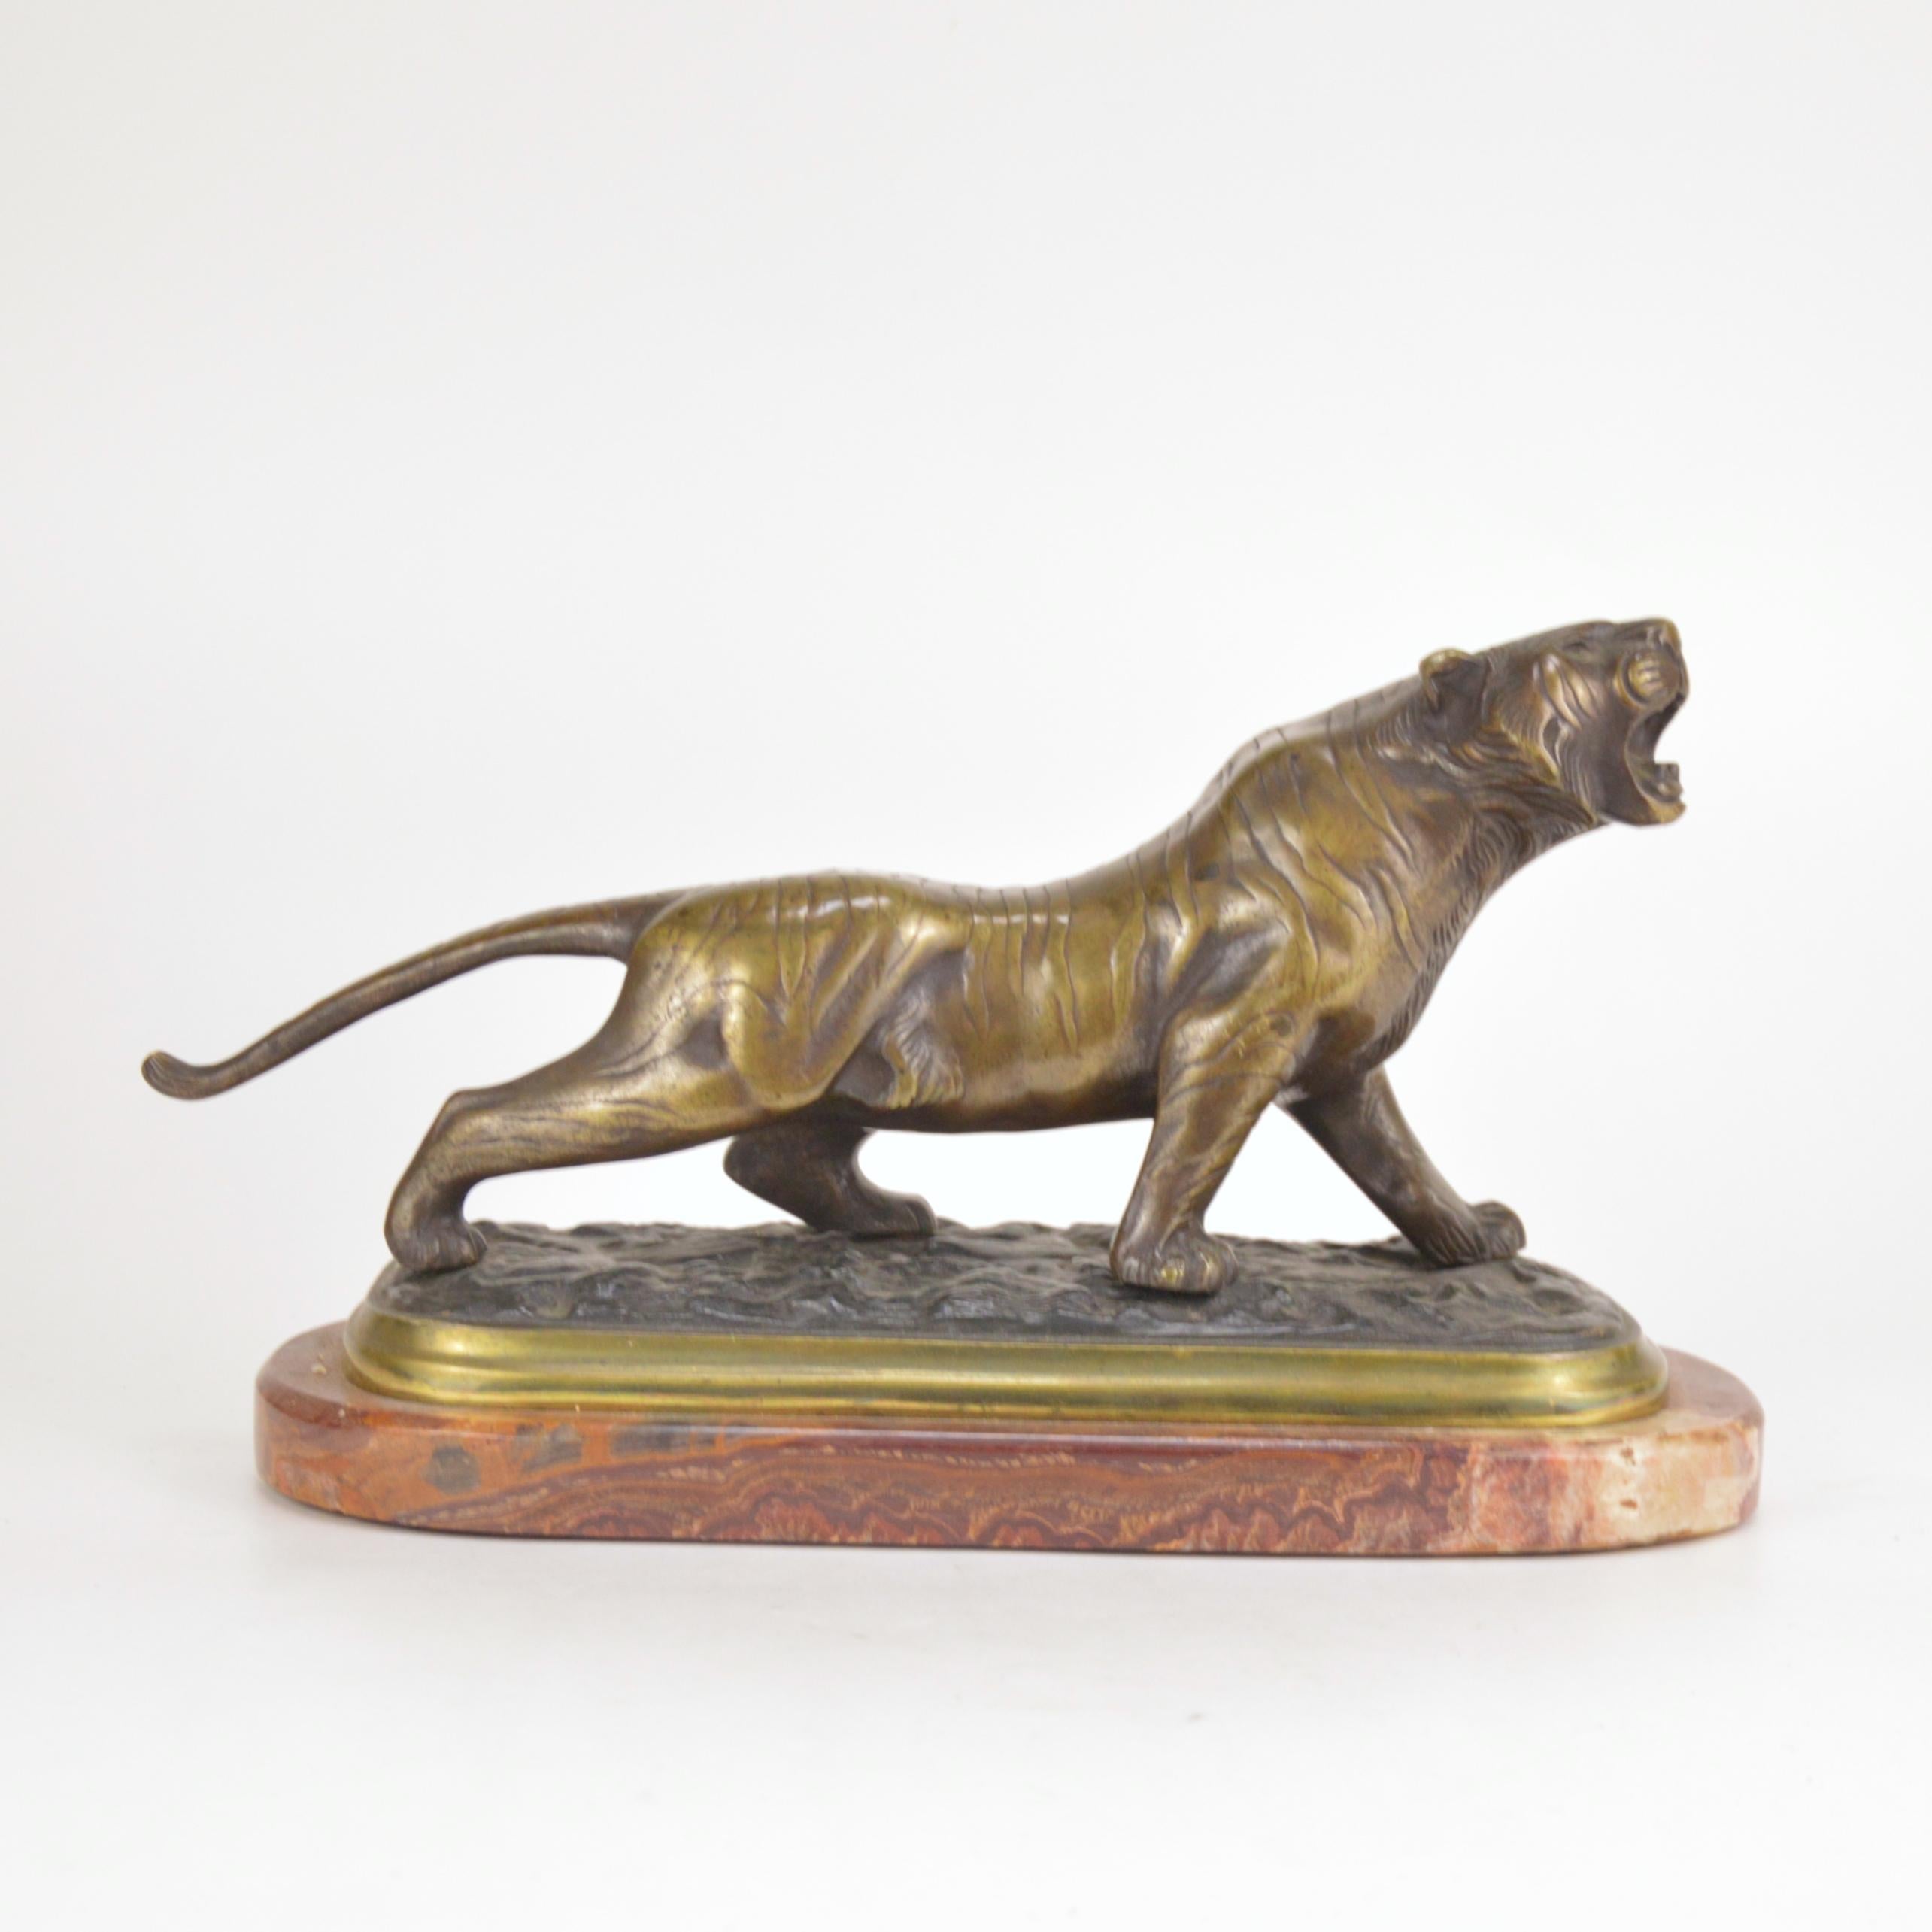 Patinated Art Deco bronze sculpture representing a roaring tiger. France, early 20th century. On a marble socle.
Dimensions: base - 25 x 16 cm, total height - 16 cm.